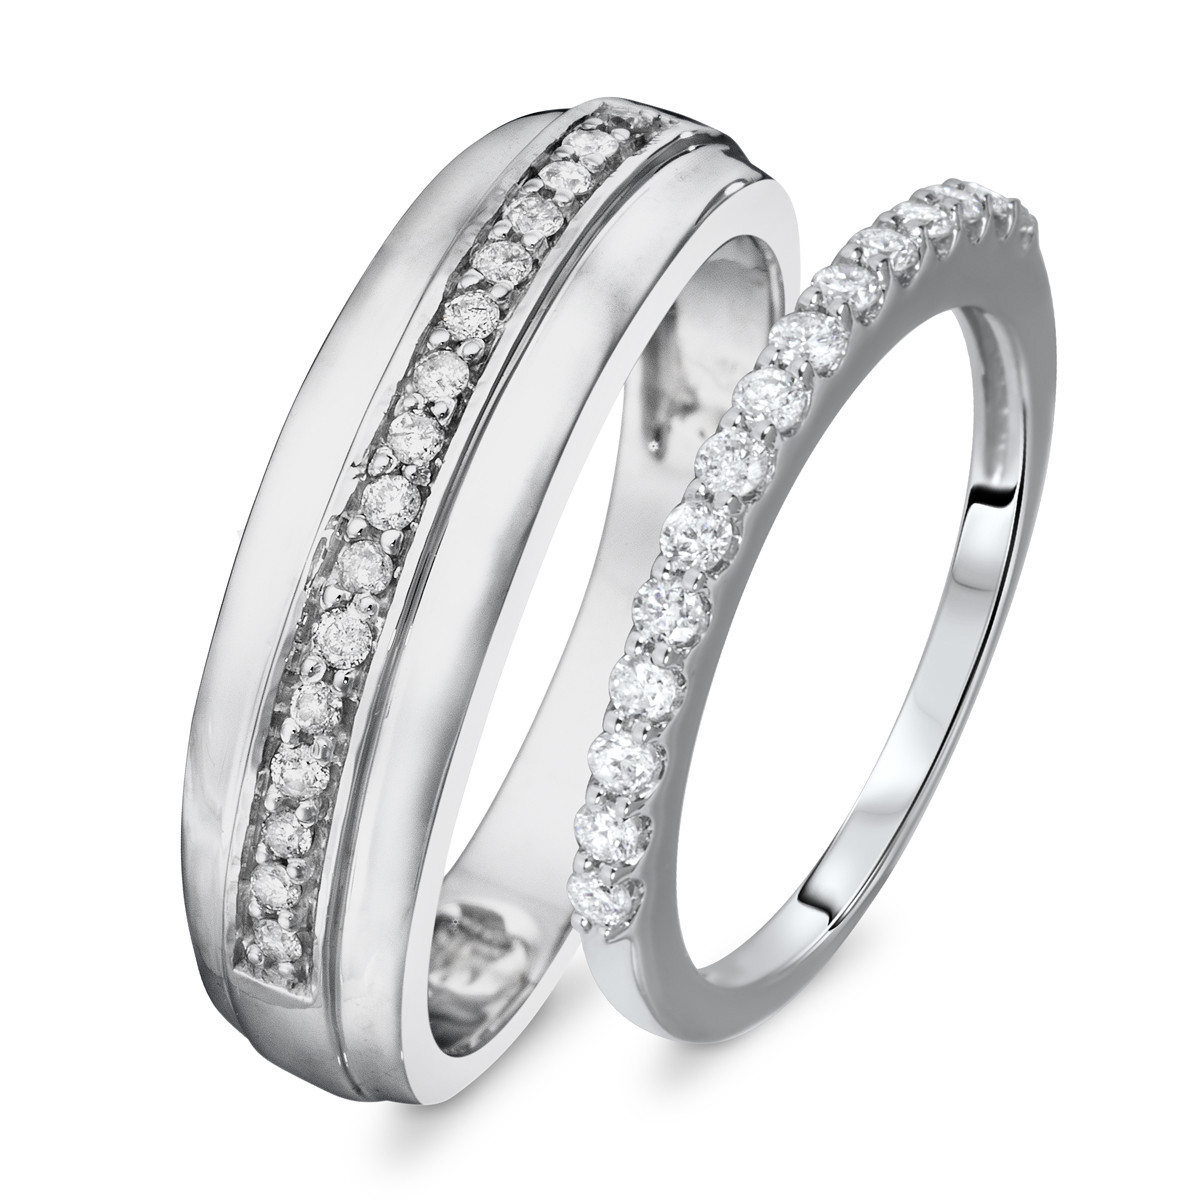 Wedding Band Sets His And Hers
 1 2 Carat T W Round Cut Diamond His And Hers Wedding Band